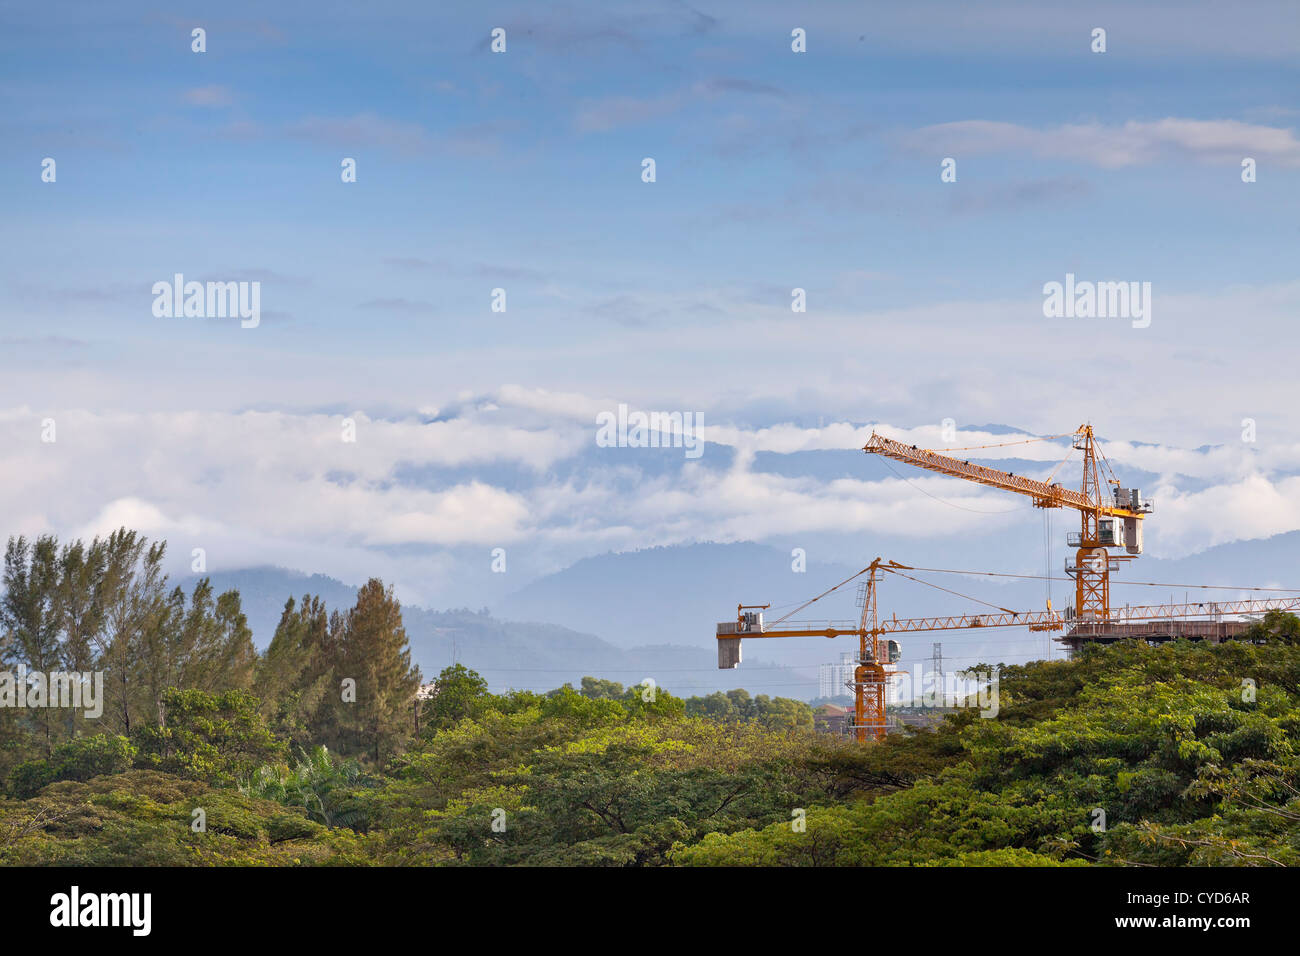 View looking North towards mist covered Genting Highlands, Malaysia. Beam cranes in foreground building new development. Stock Photo